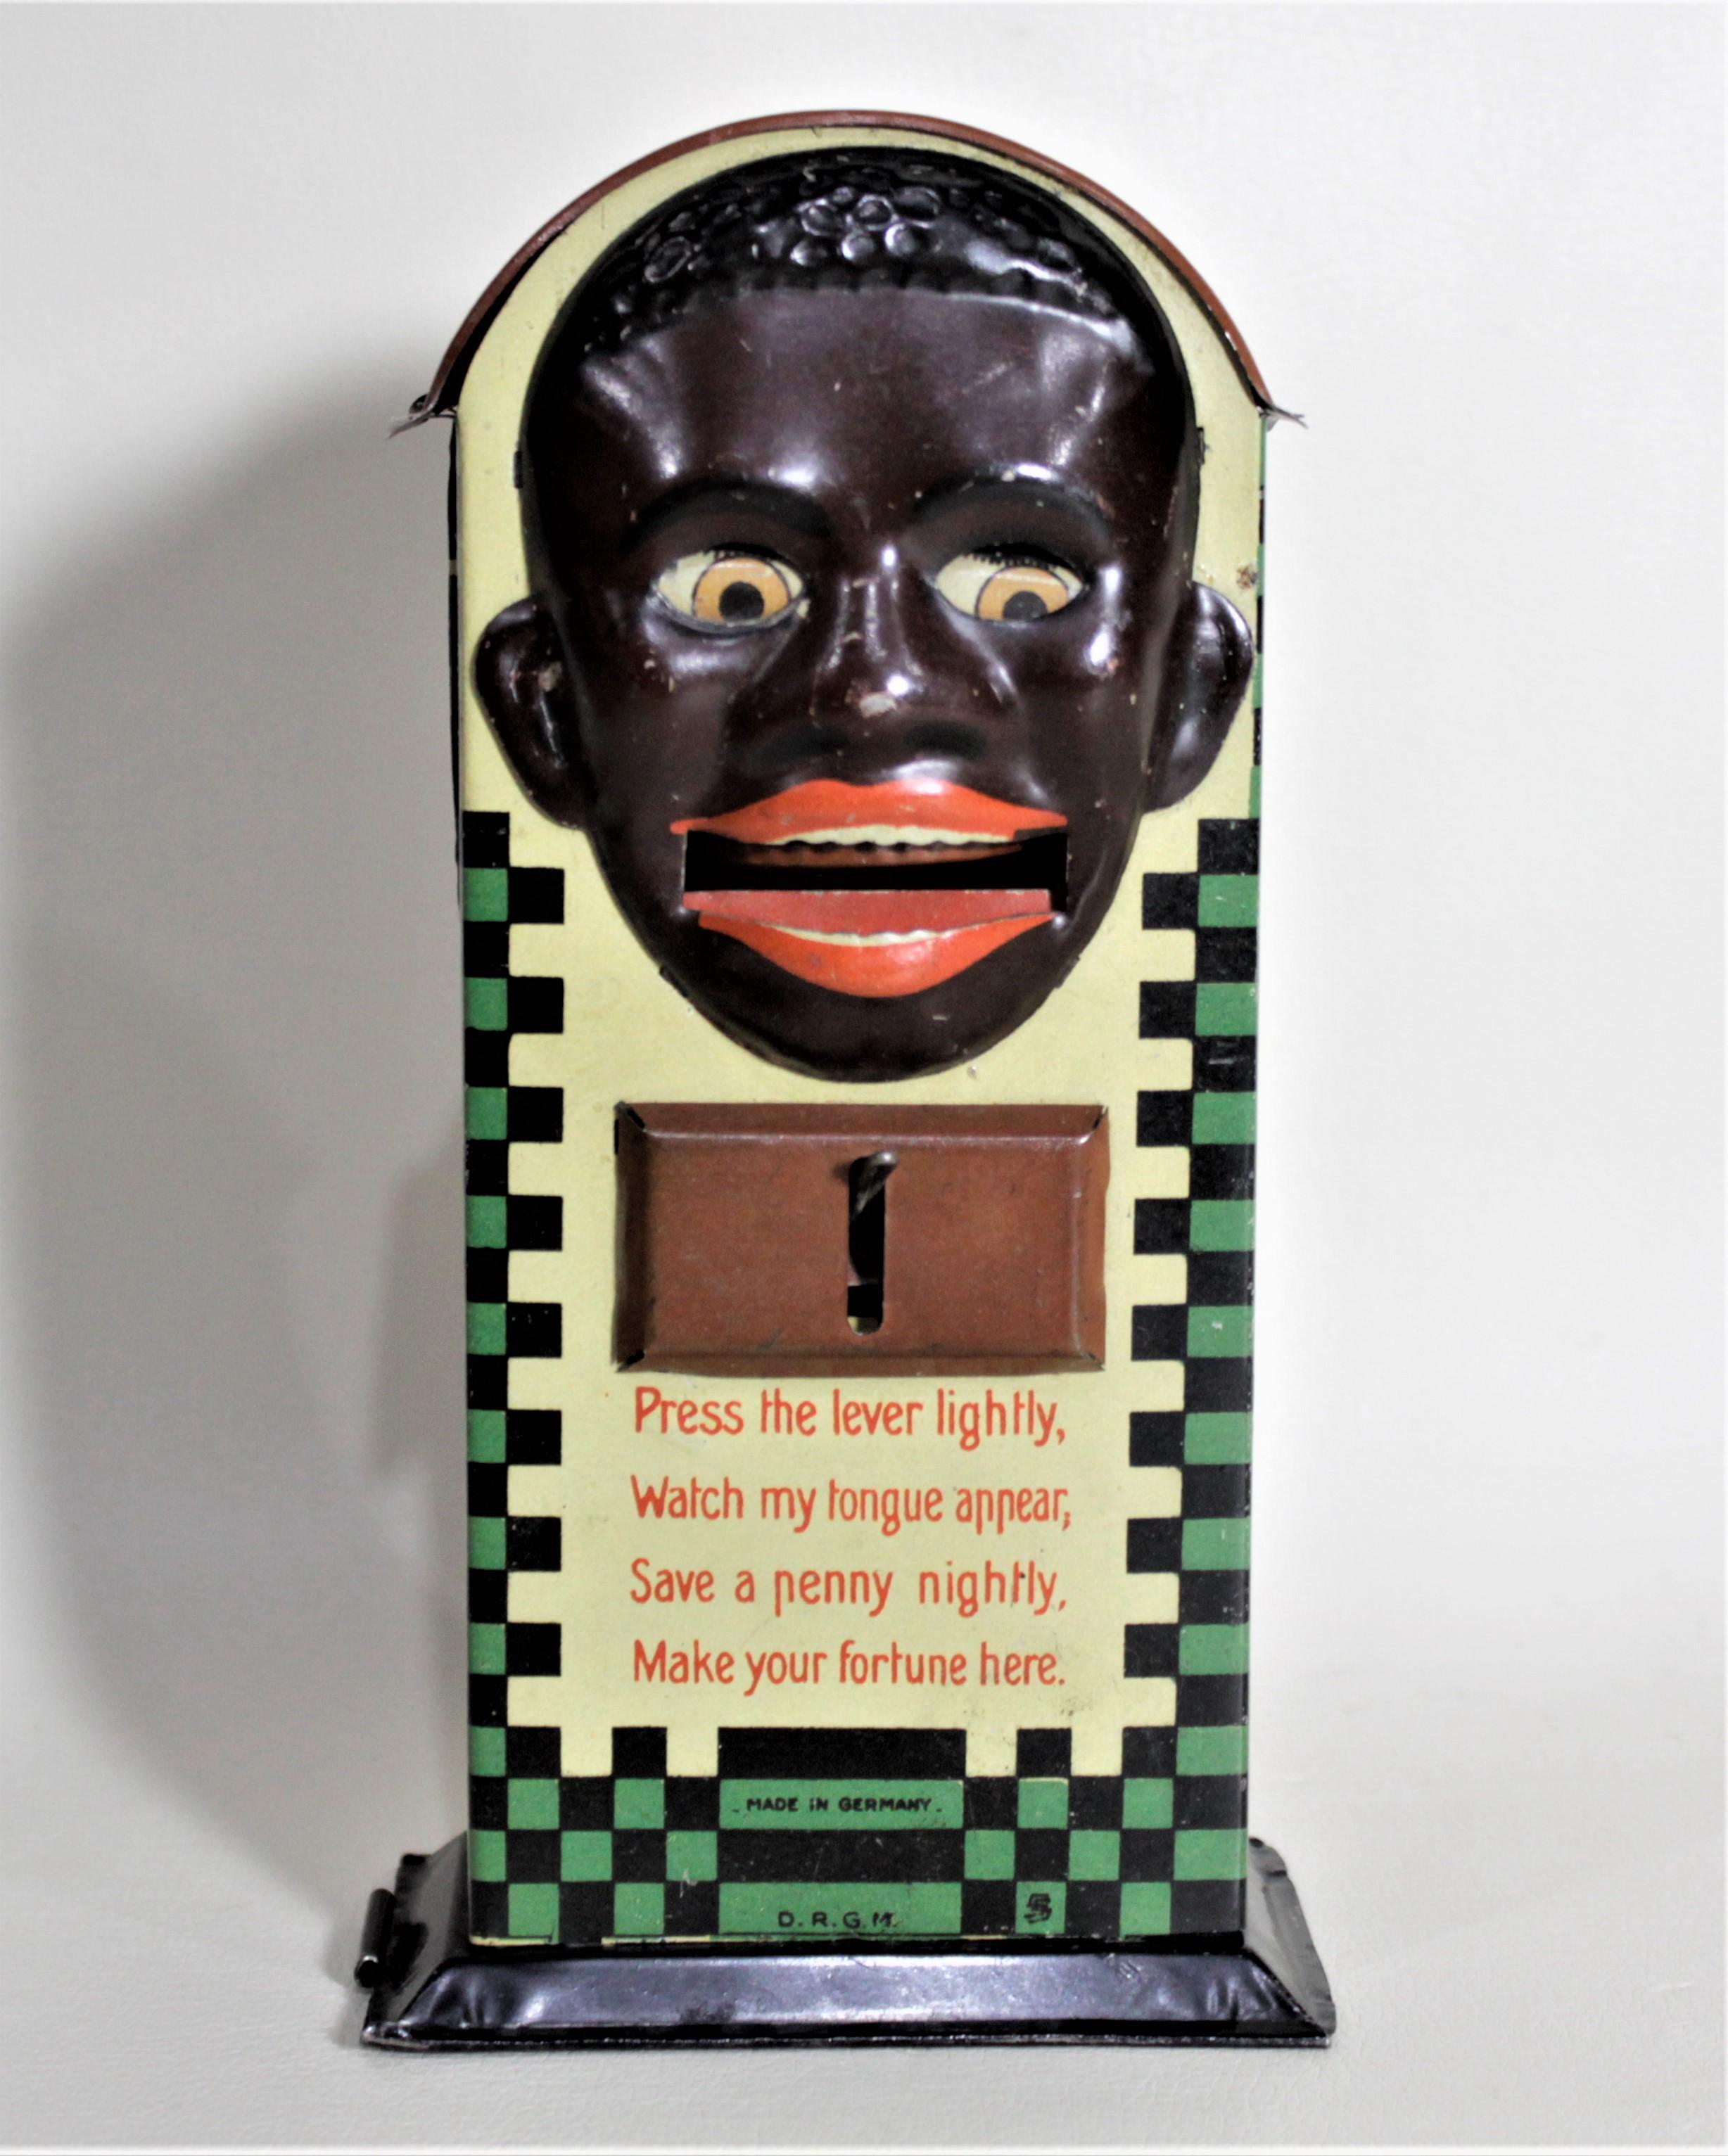 This lithographed tin coin bank was produced in Germany in circa 1935 in the period Art Deco style. The bank is shaped like a coin box with a man's face on the front. When the lever is pulled, the man's eyes close and his tongue appears which a coin